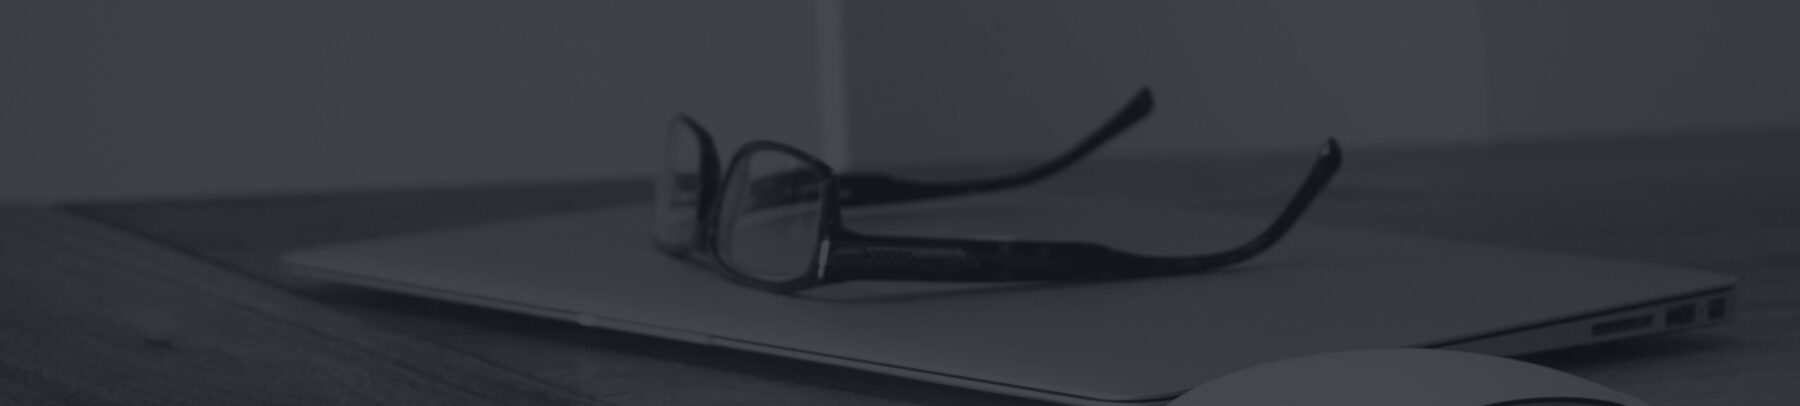 Glasses on a closed laptop